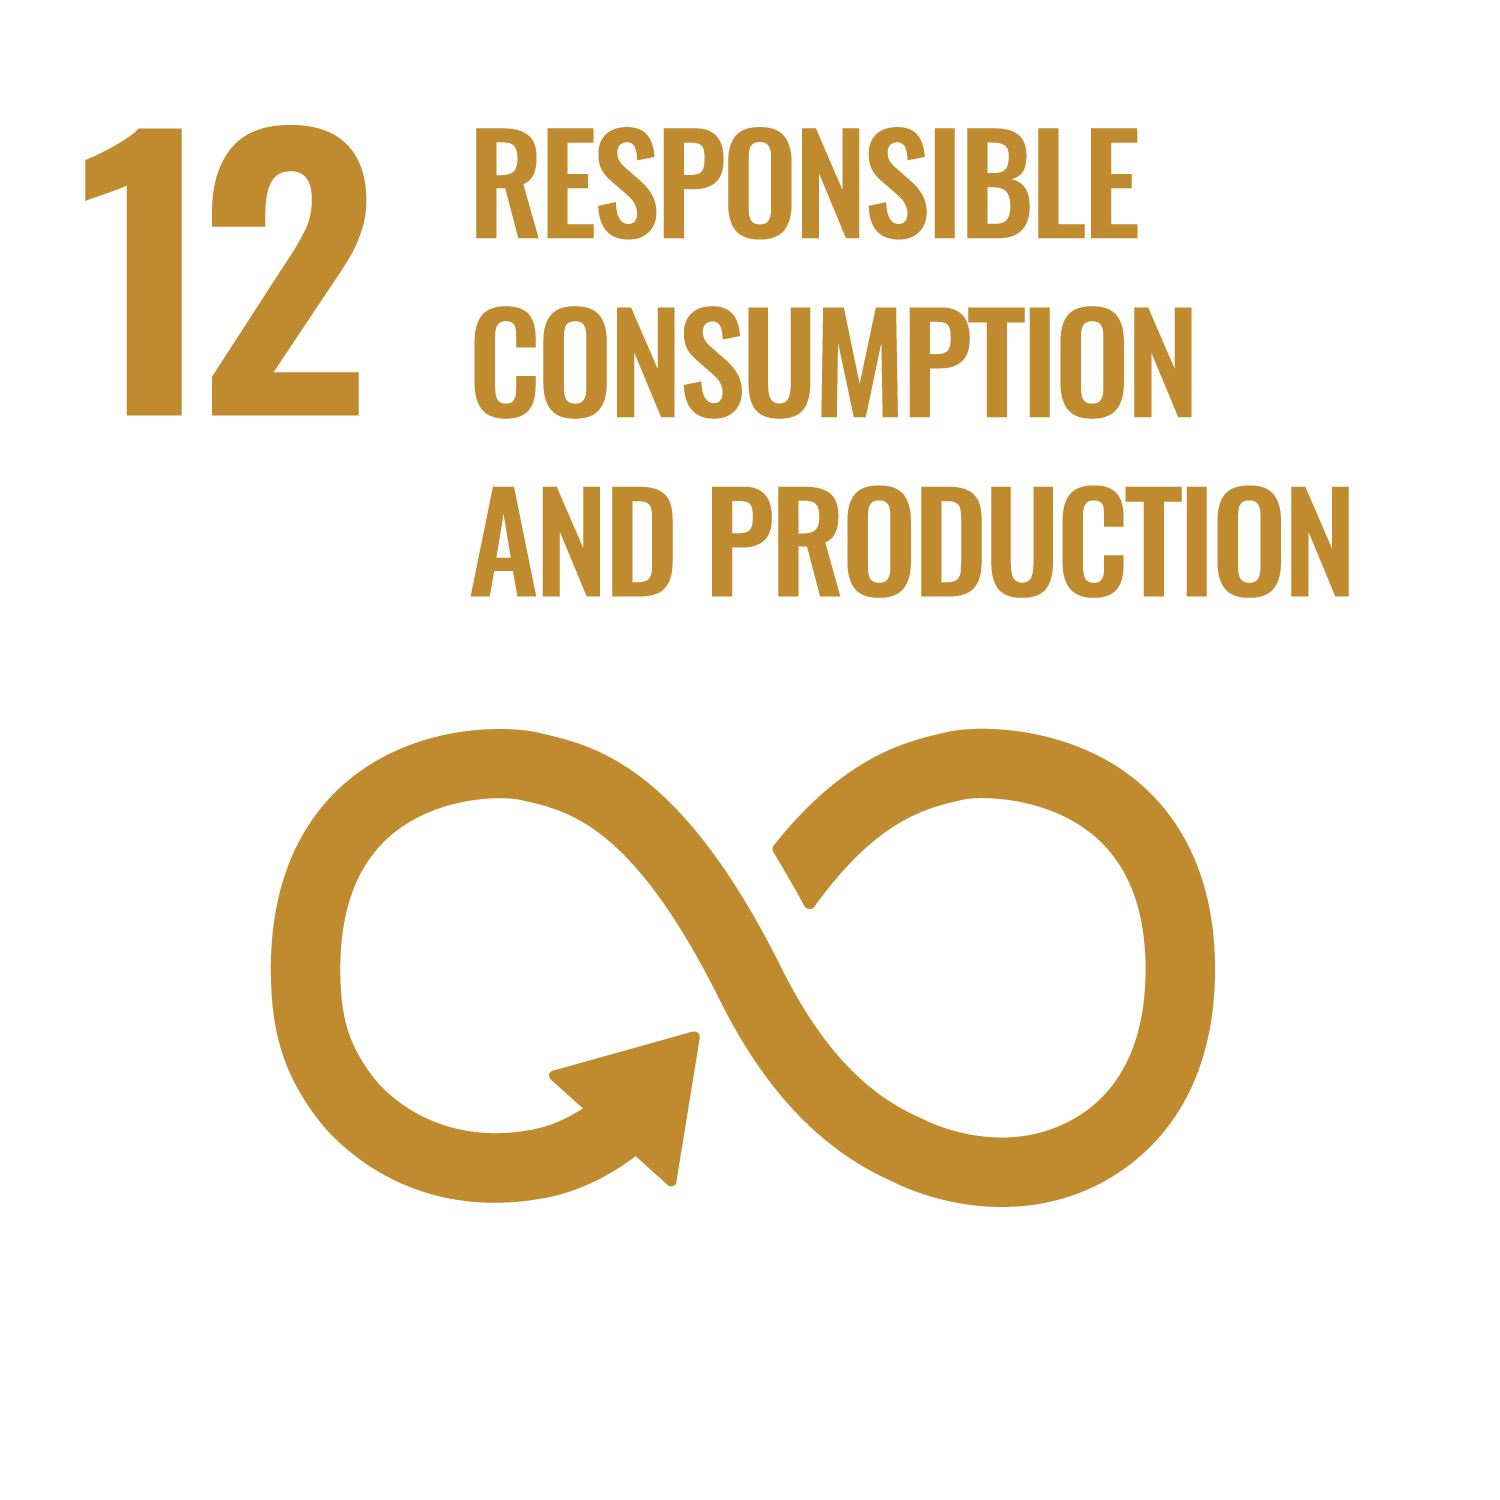 12_Responsible_Consumption_And_Production